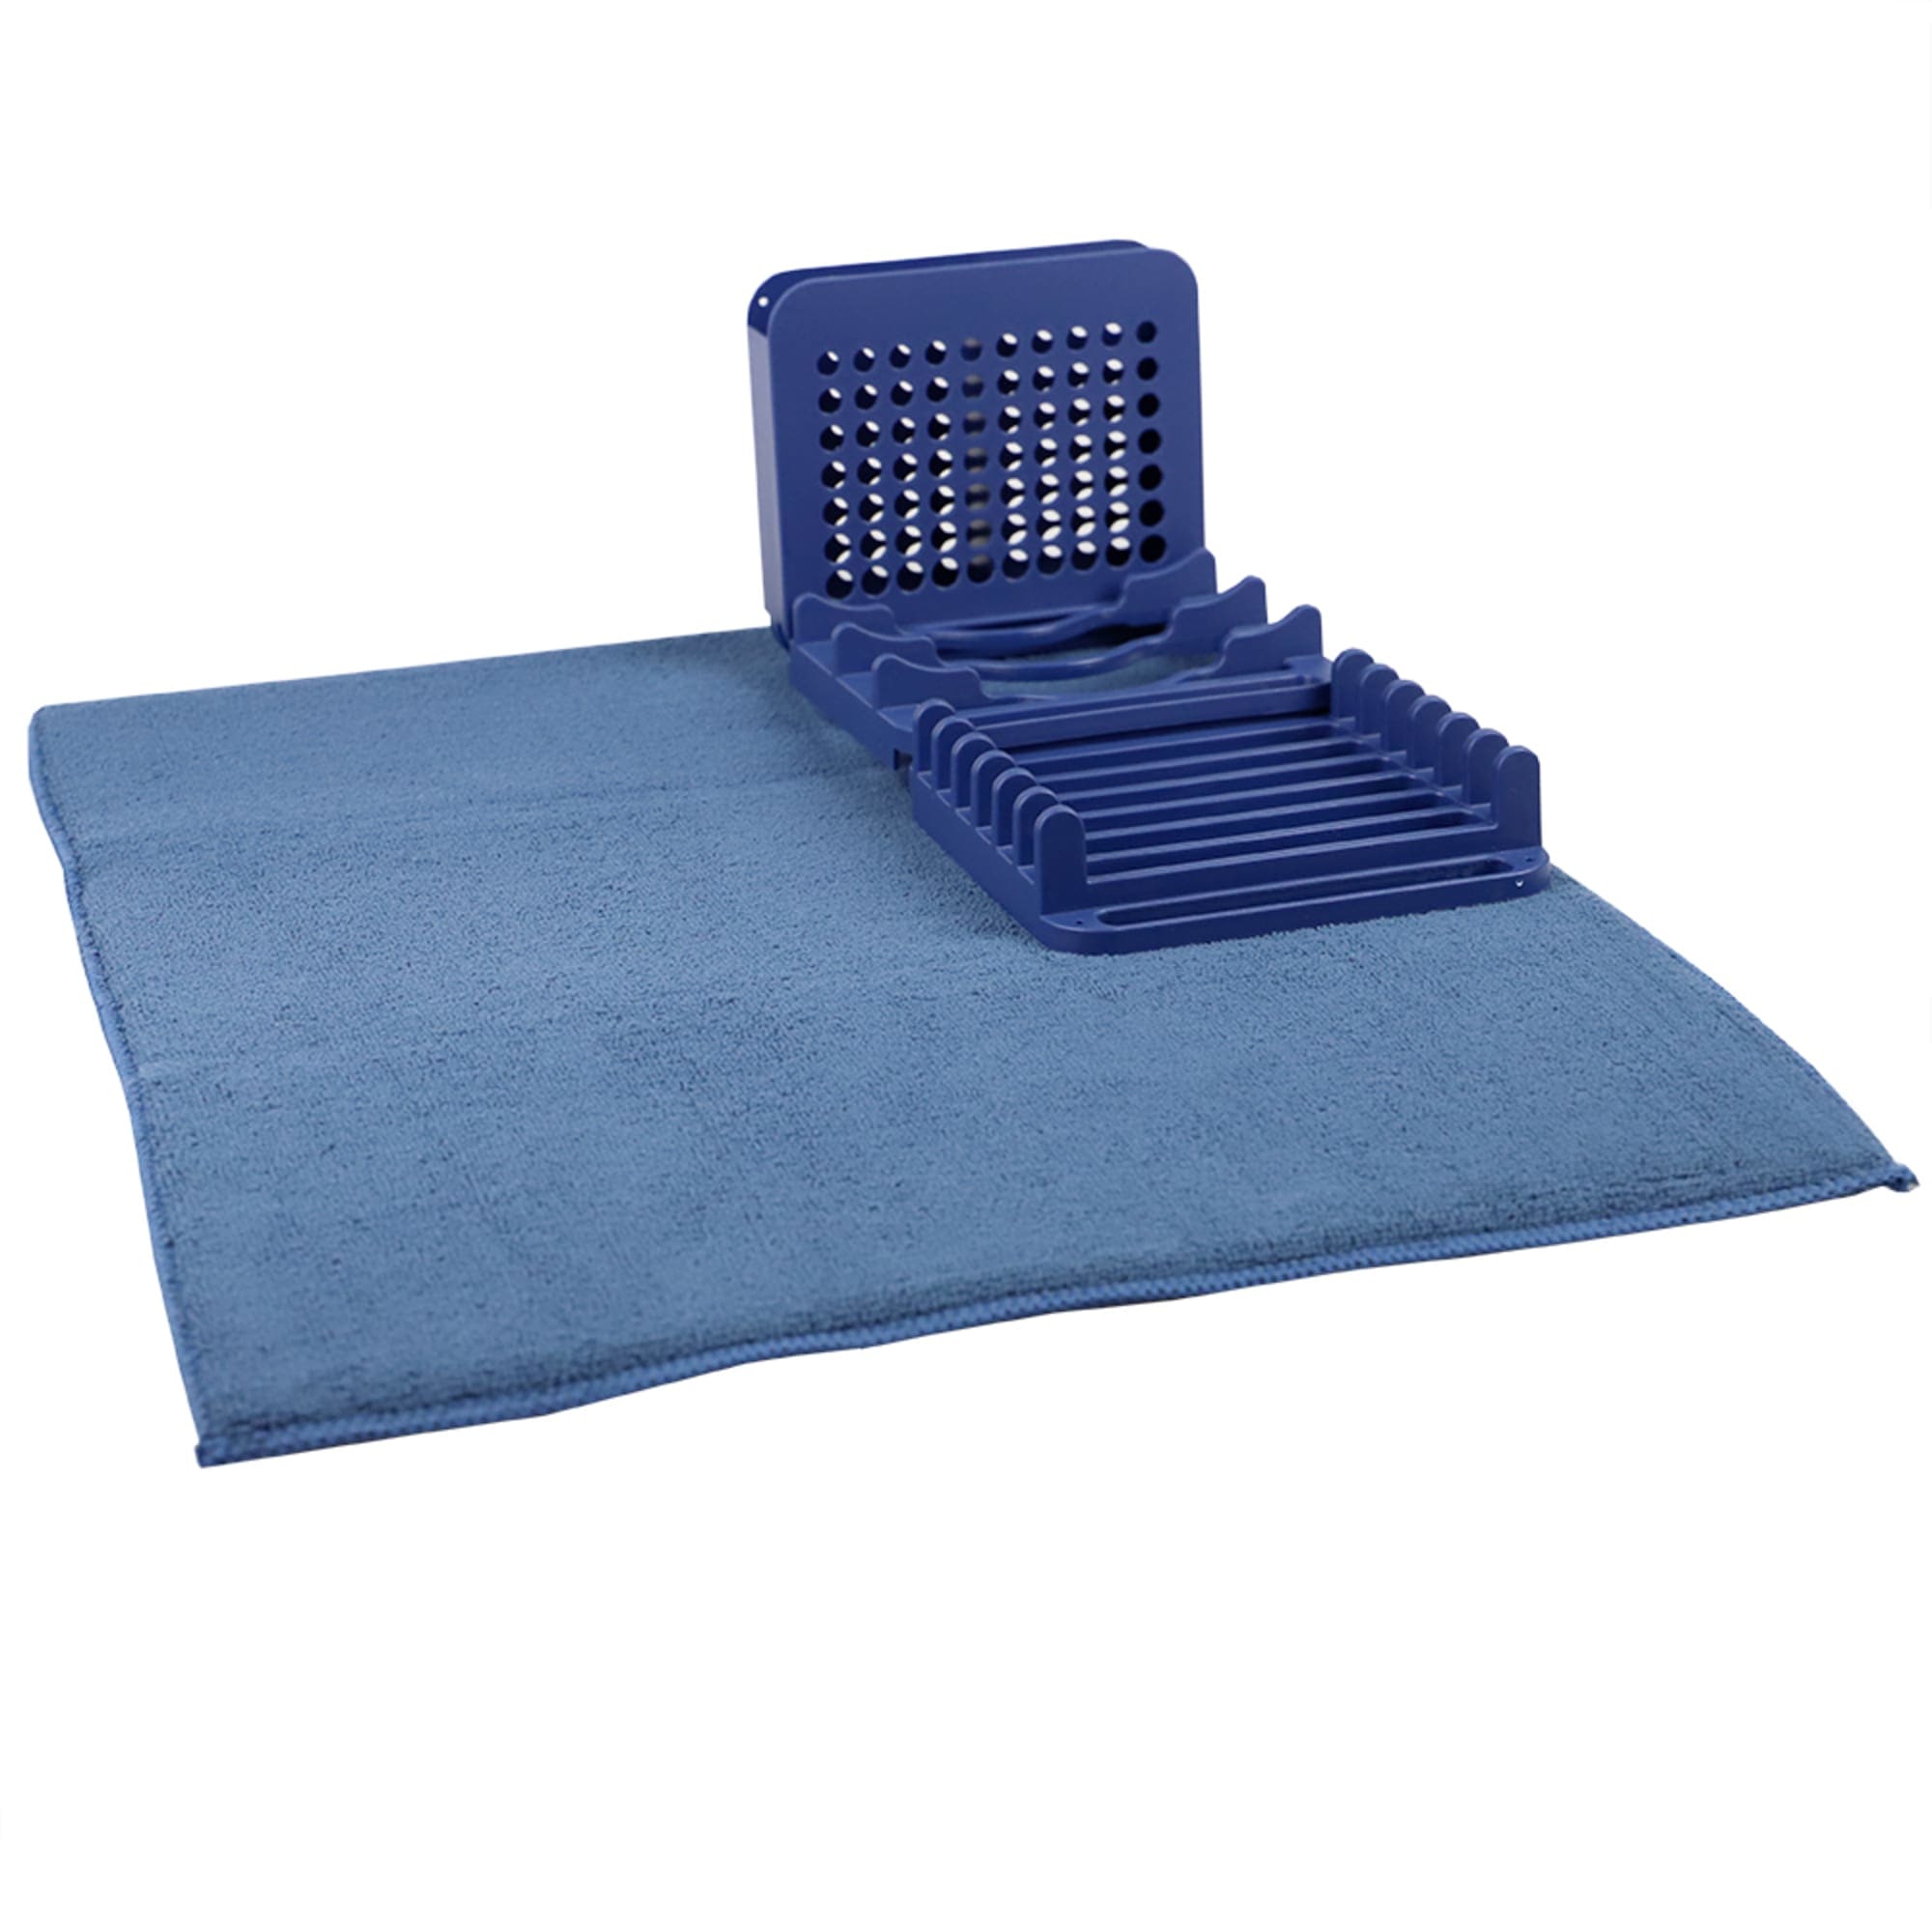 Dish Drying Mat with 3 Section Rack - Green